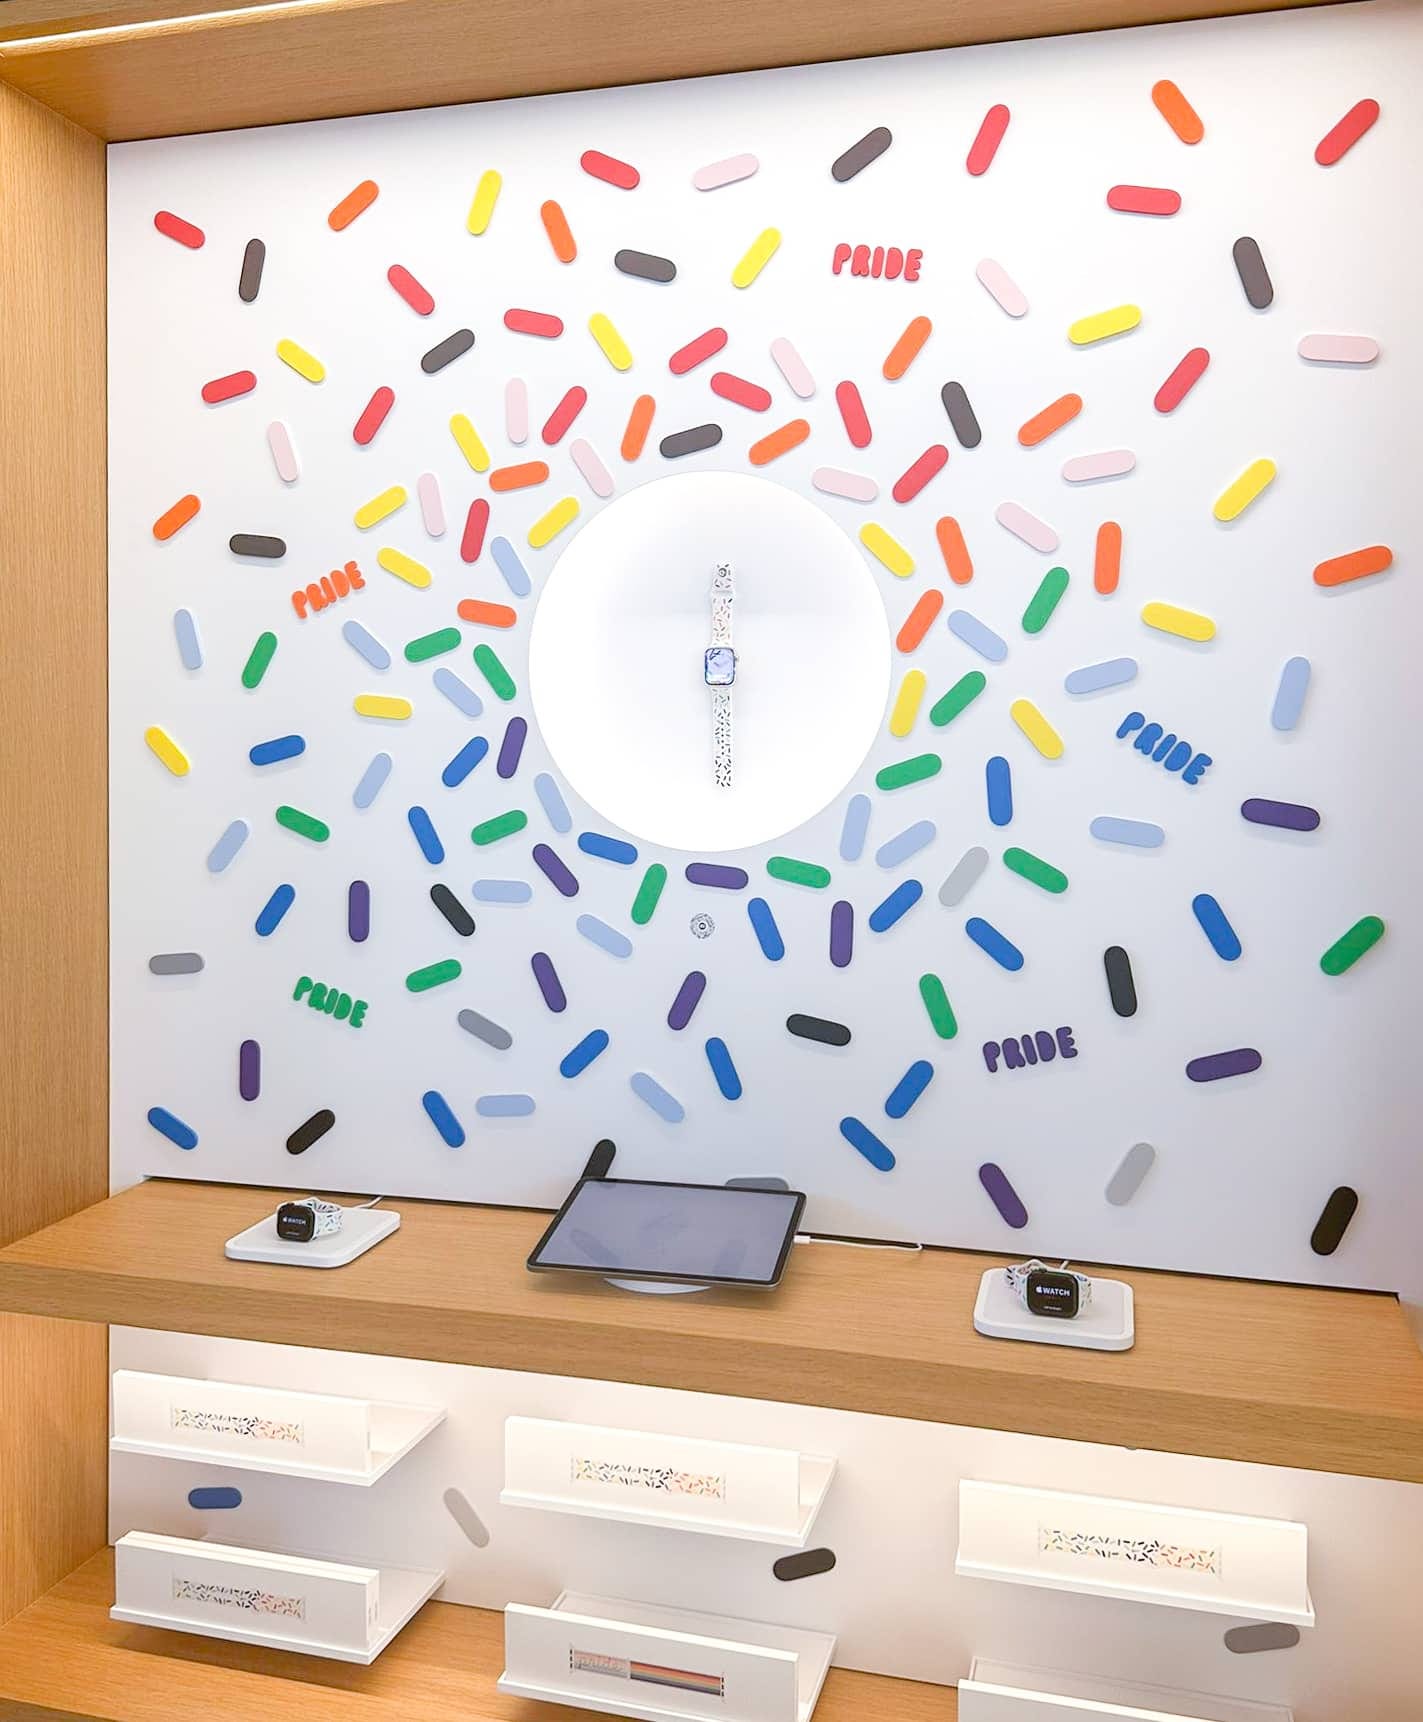 The Apple Watch Pride bay at Apple Park Visitor Center. The design is a reinterpretation of the version found at other stores.